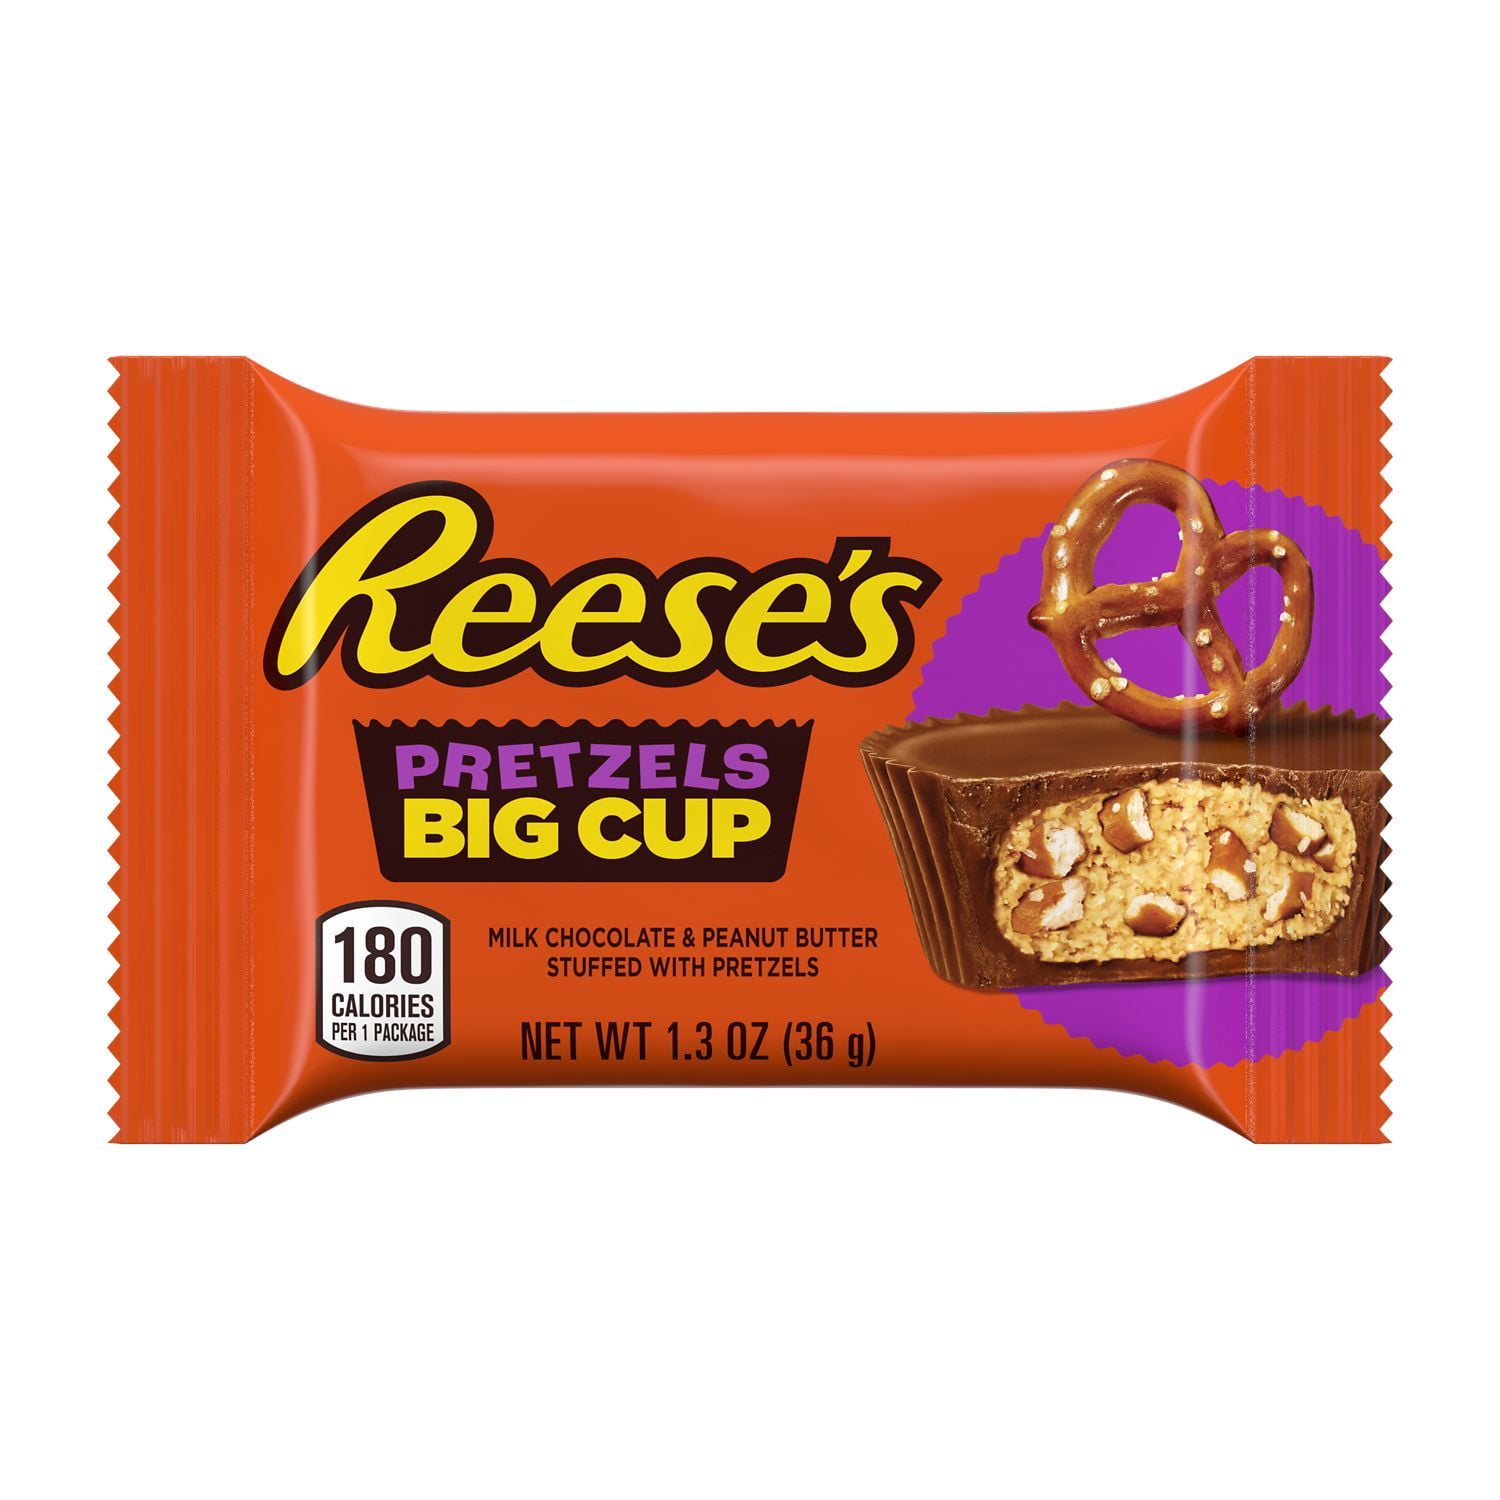 Reese's, Big Cup Milk Chocolate Peanut Butter Stuffed with Pretzels Cups Candy, Gluten Free, 1.3 oz, Pack